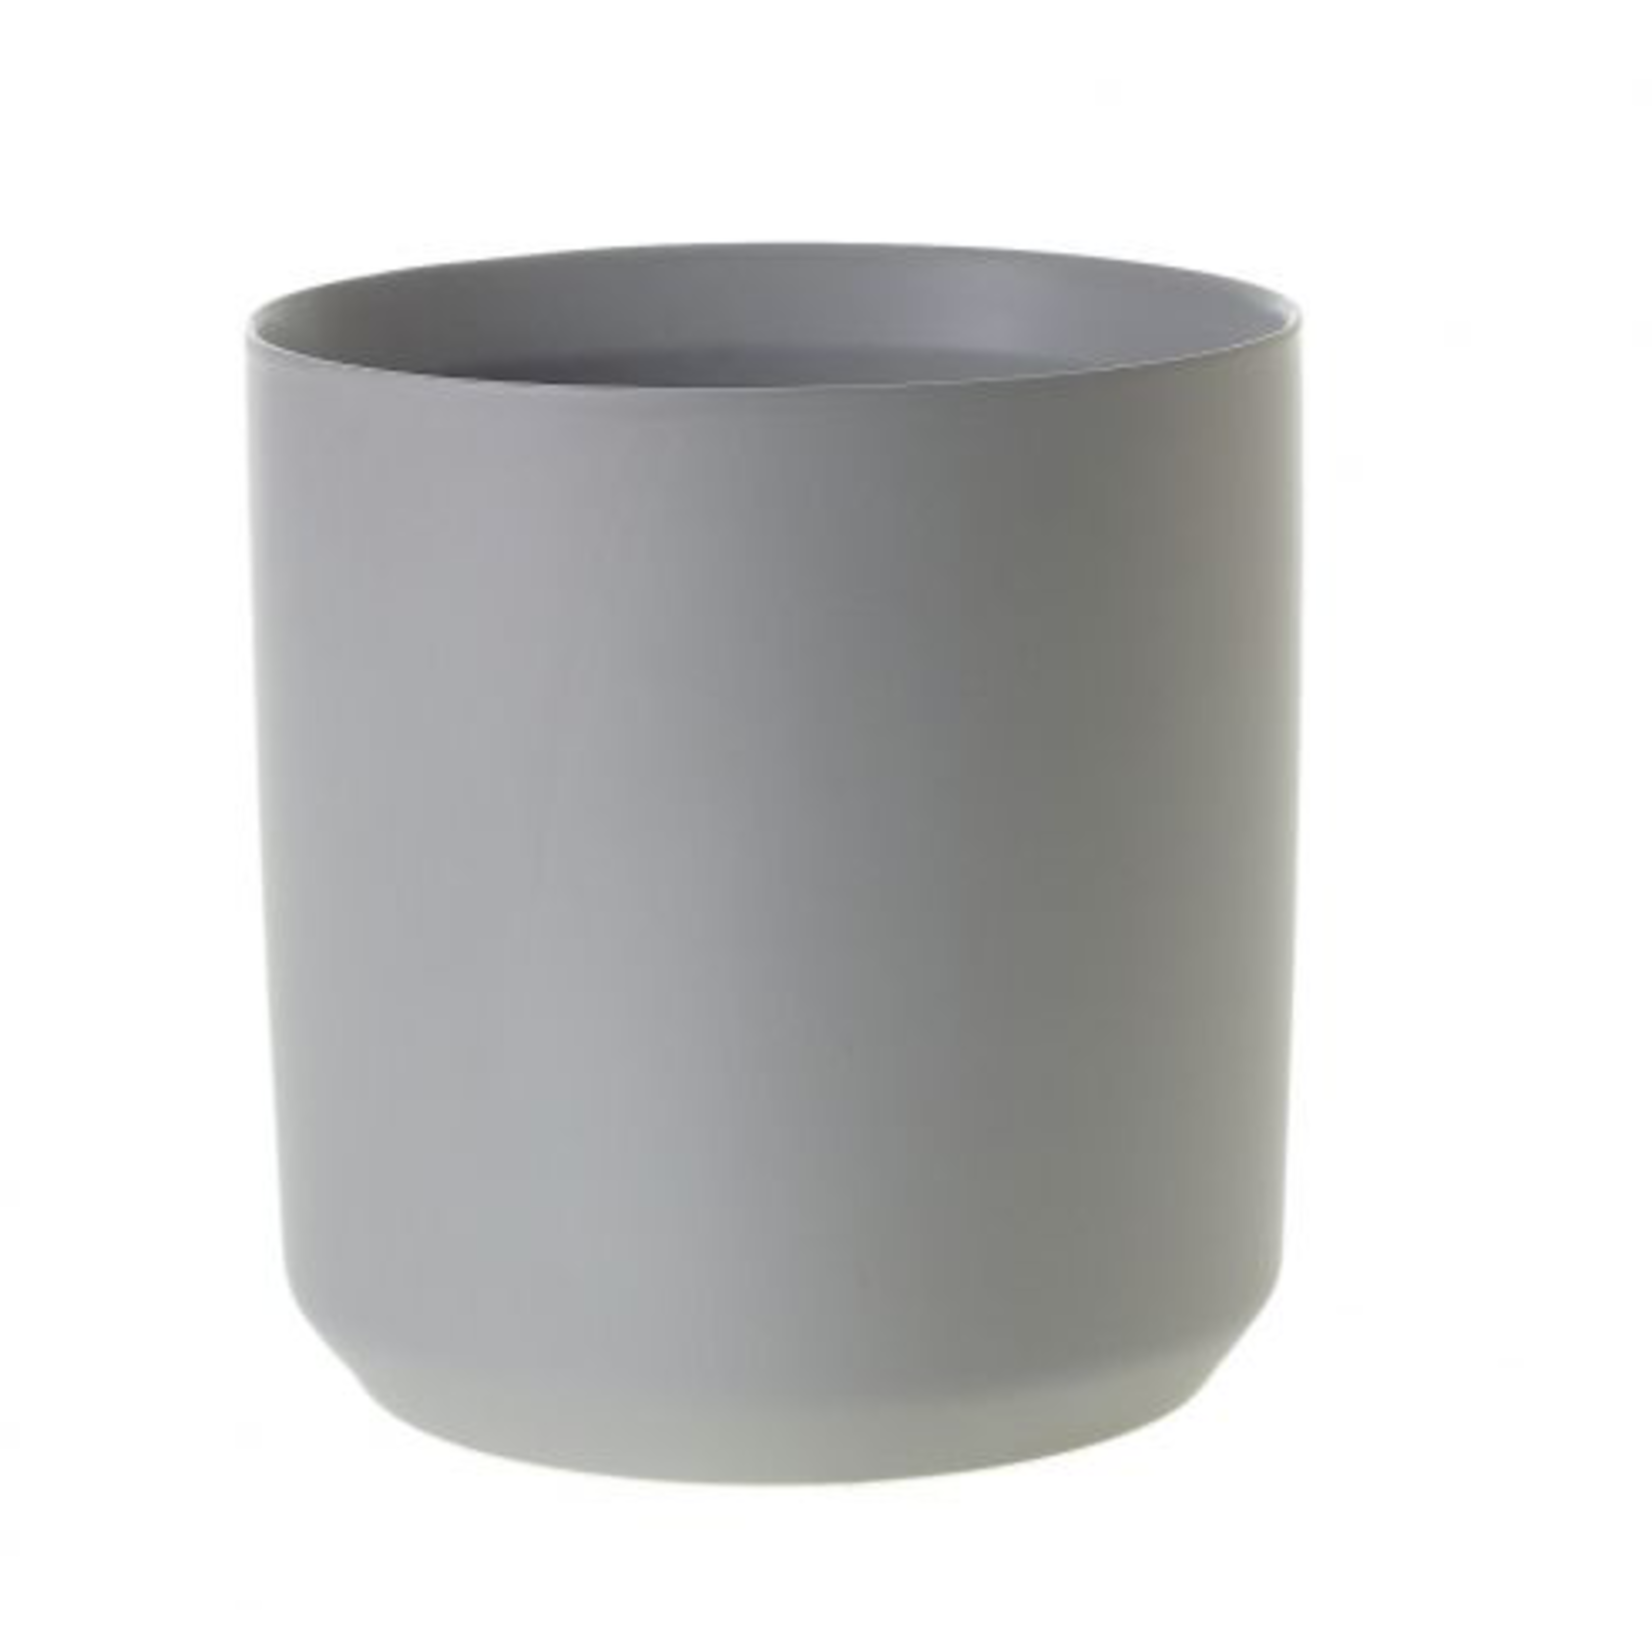 40% off was $43 now $25.79. 10H X 10.75" GREY KENDALL POT (AD)